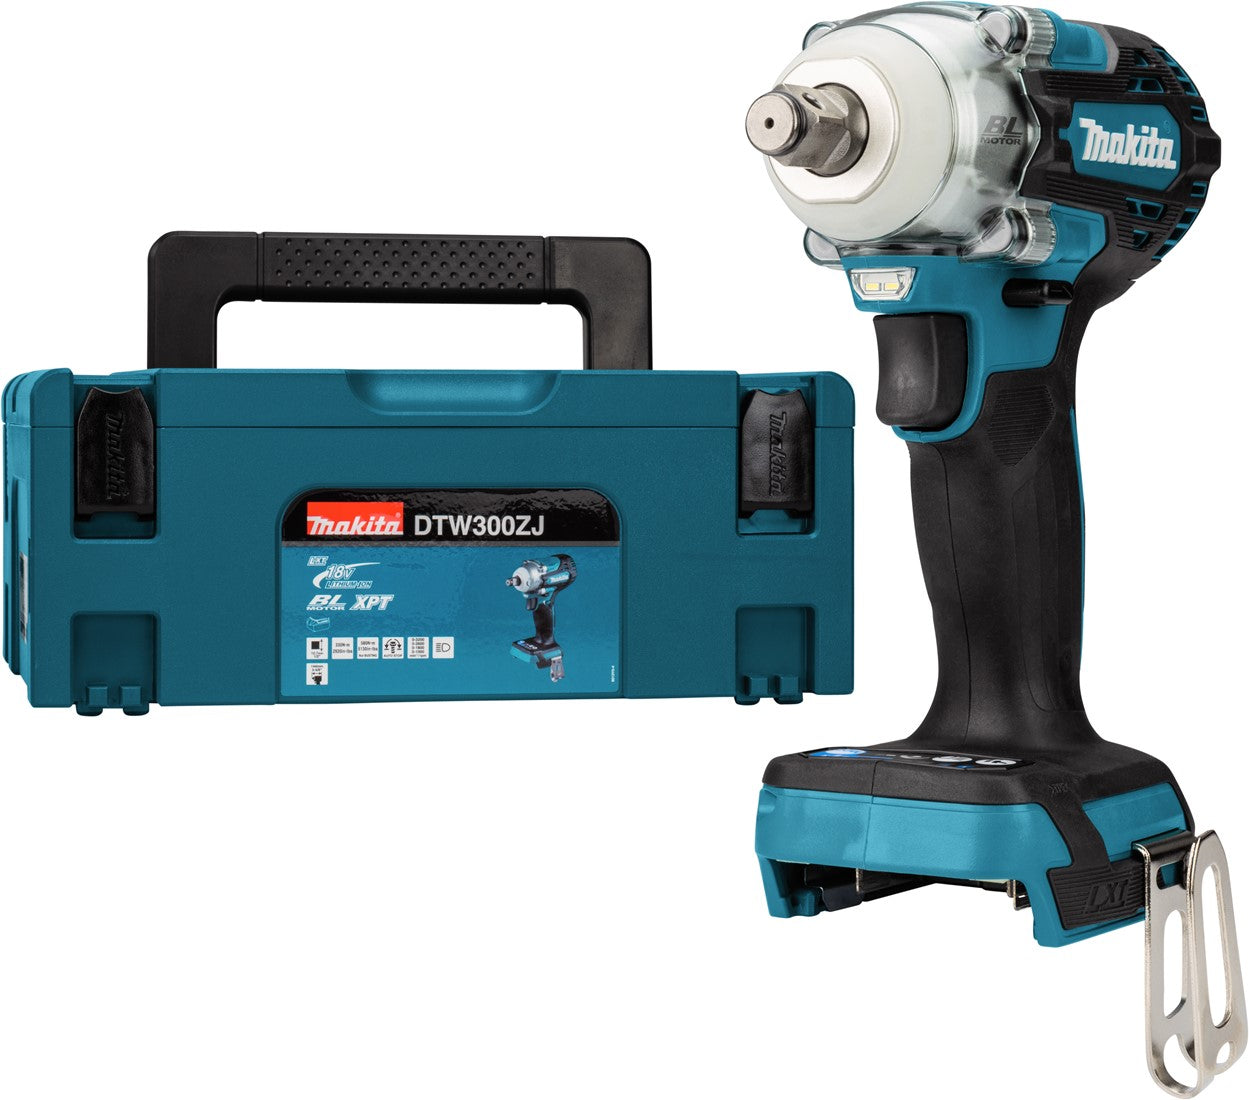 Makita 18v Cordless Brushless 1/2" Impact Wrench LXT DTW300ZK